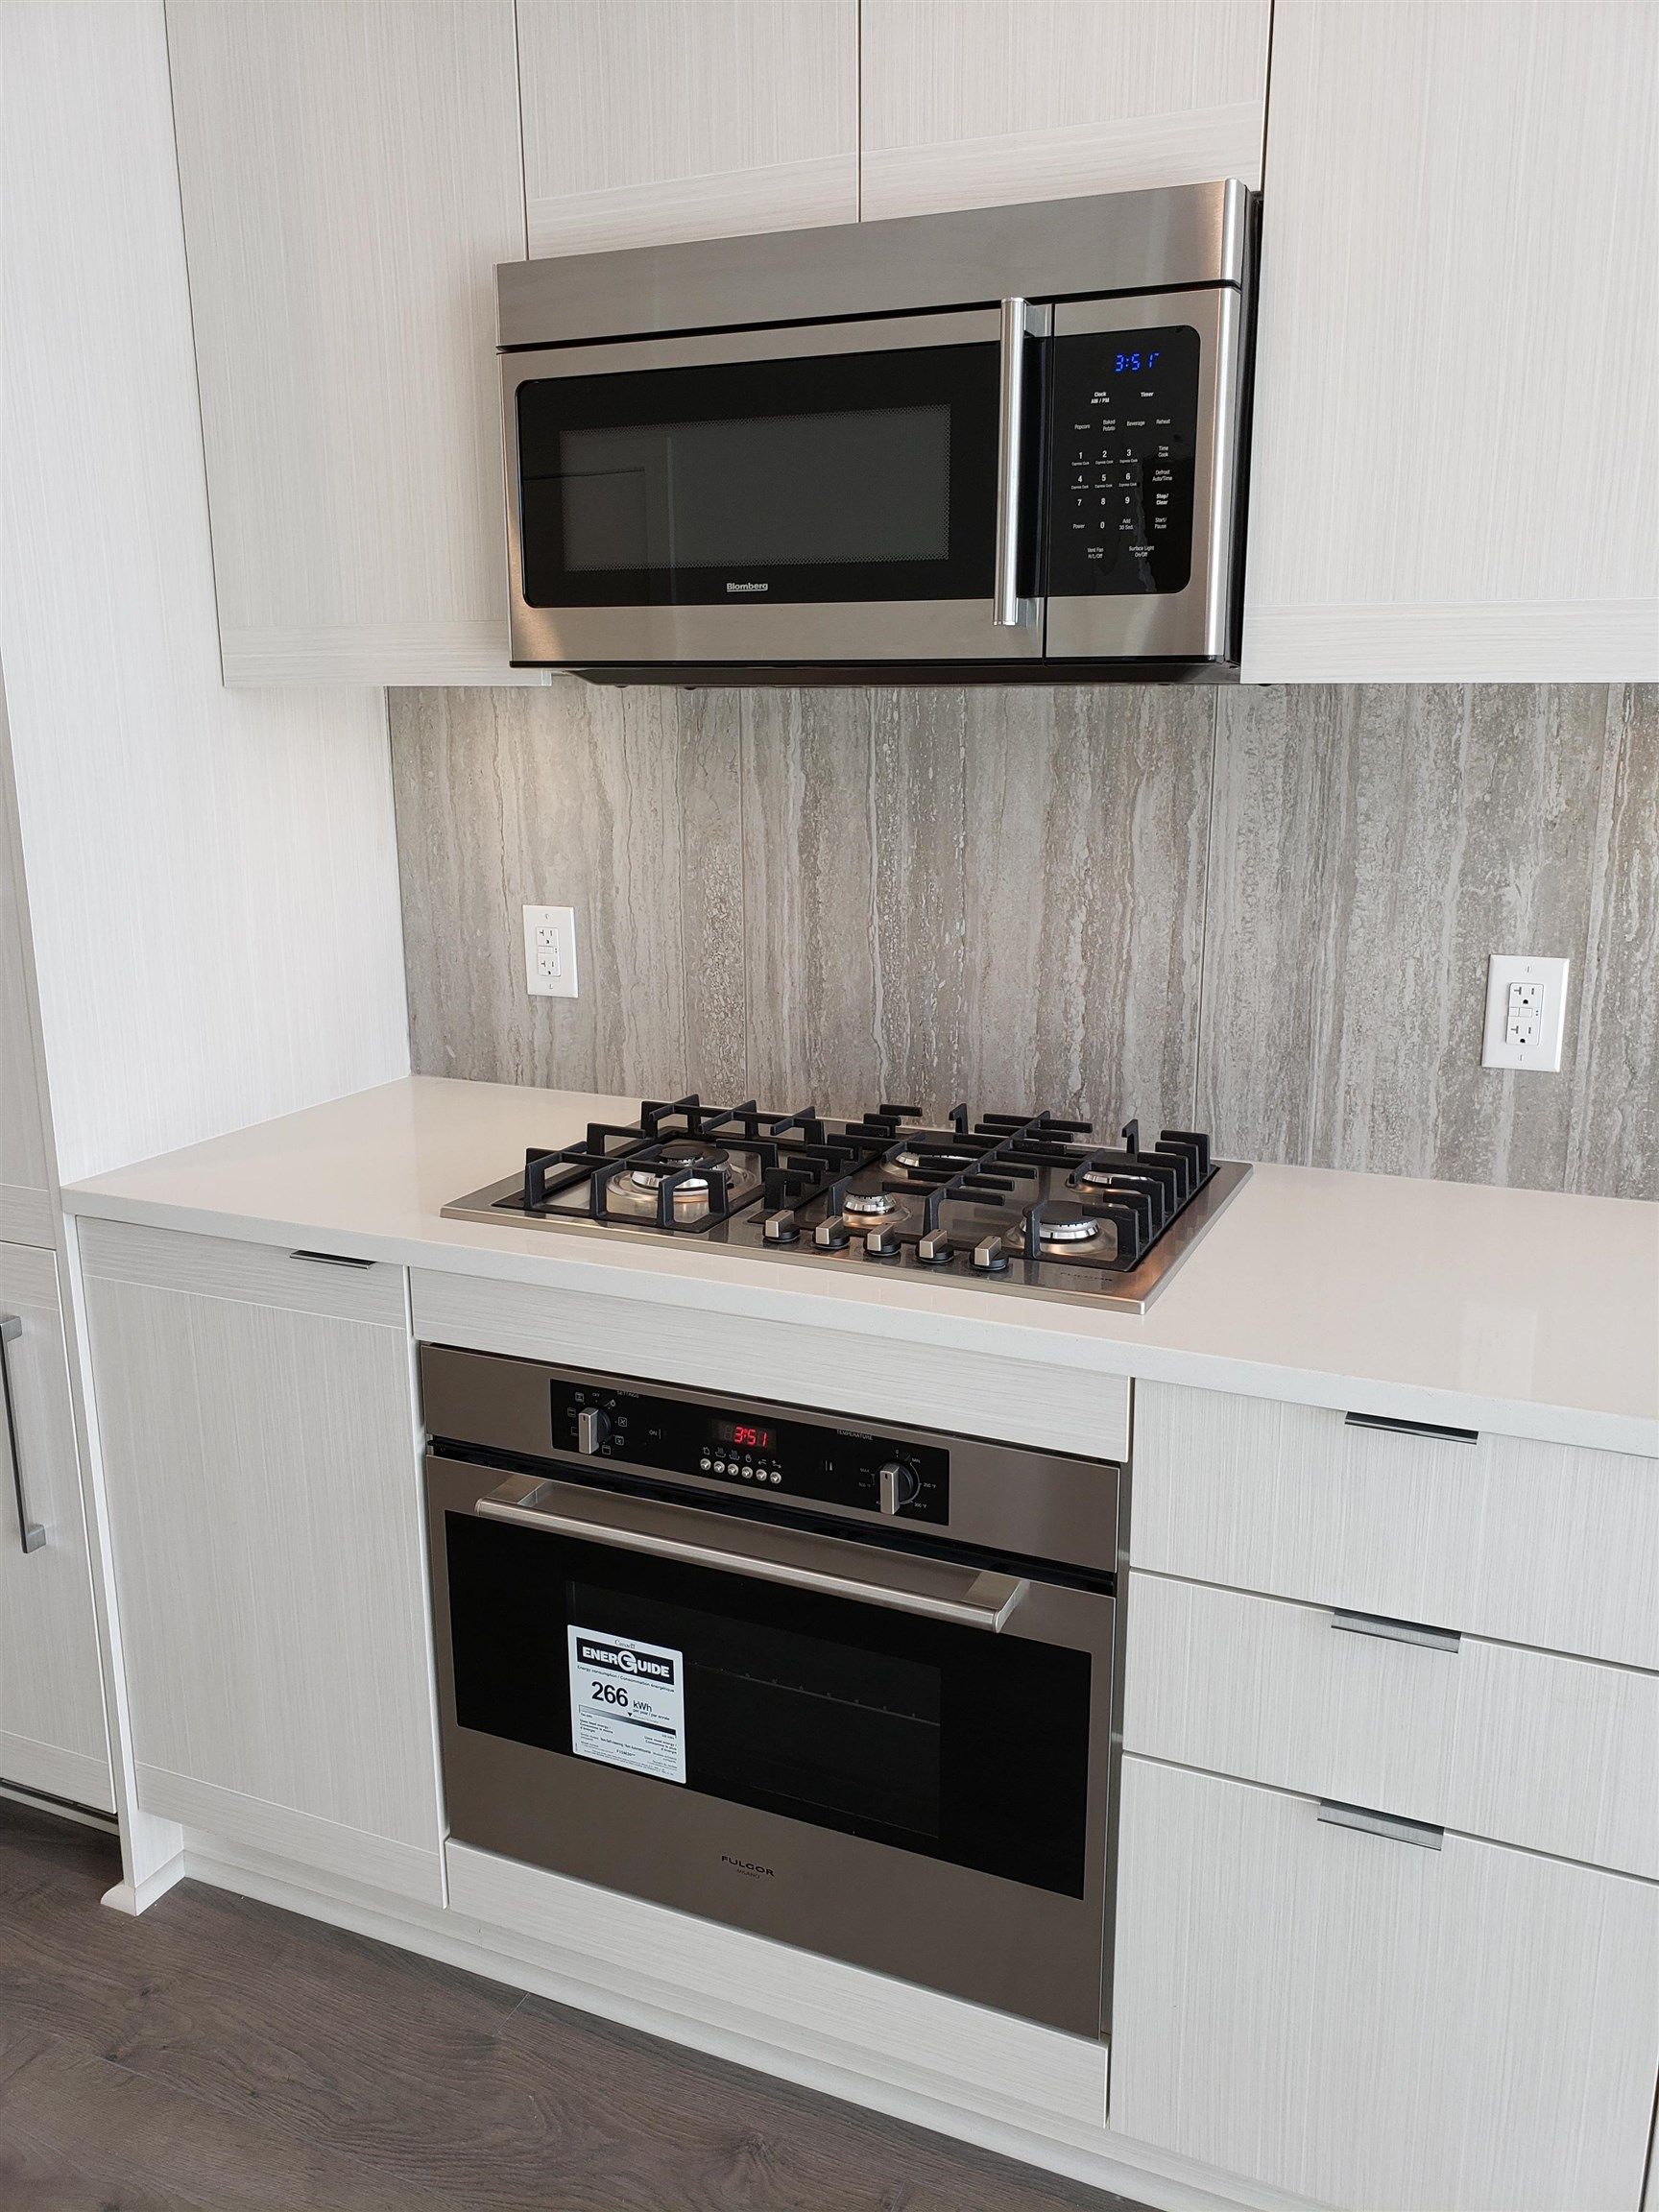 Photo 8: Photos: 506 5051 IMPERIAL STREET in Burnaby: Metrotown Condo for sale (Burnaby South)  : MLS®# R2626977